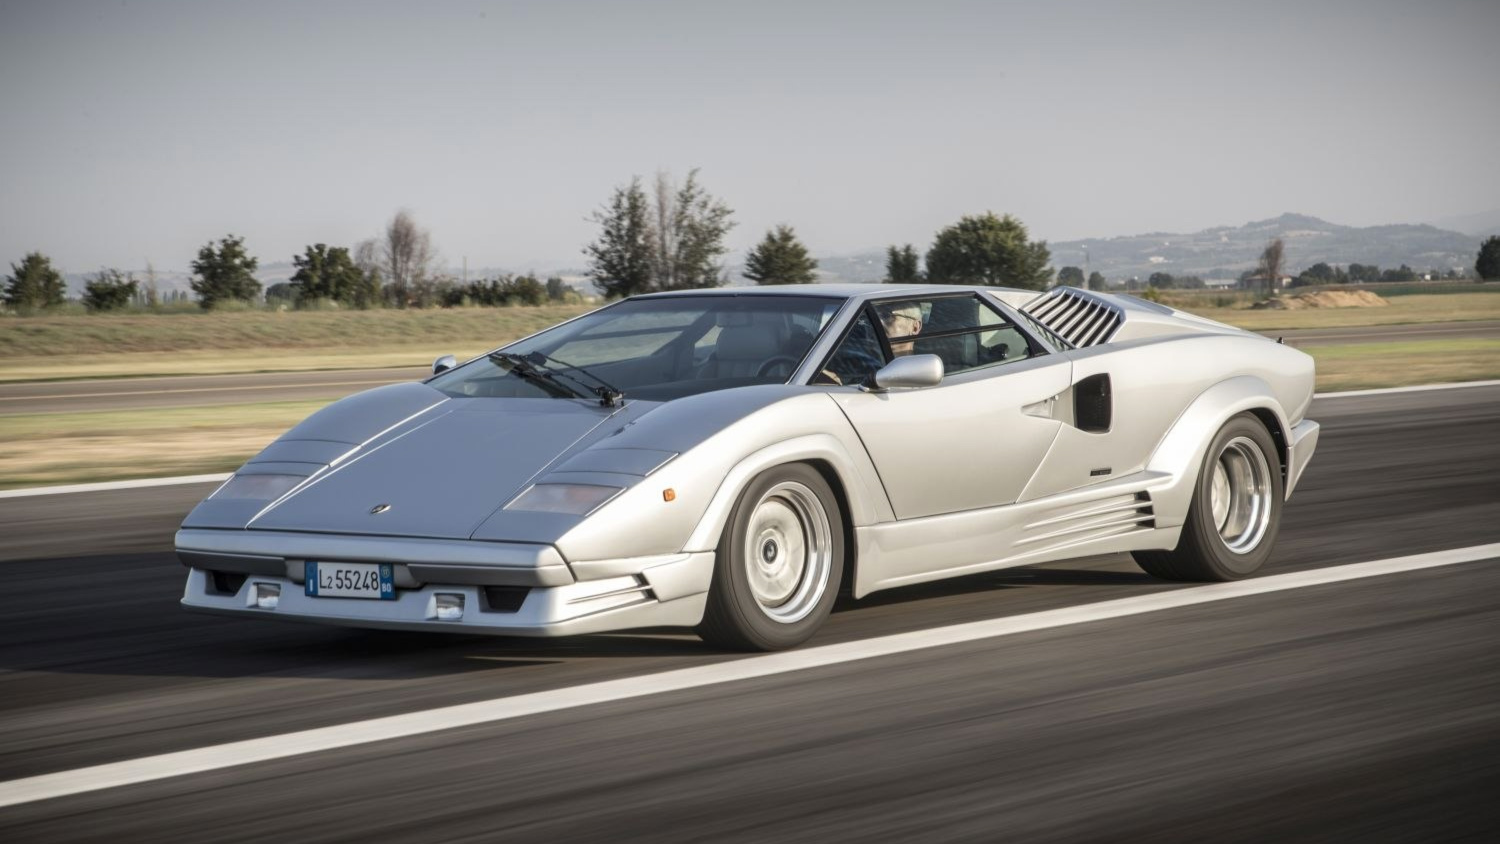 Top 10 Cars from The 1980s That Redefined Speed & Power